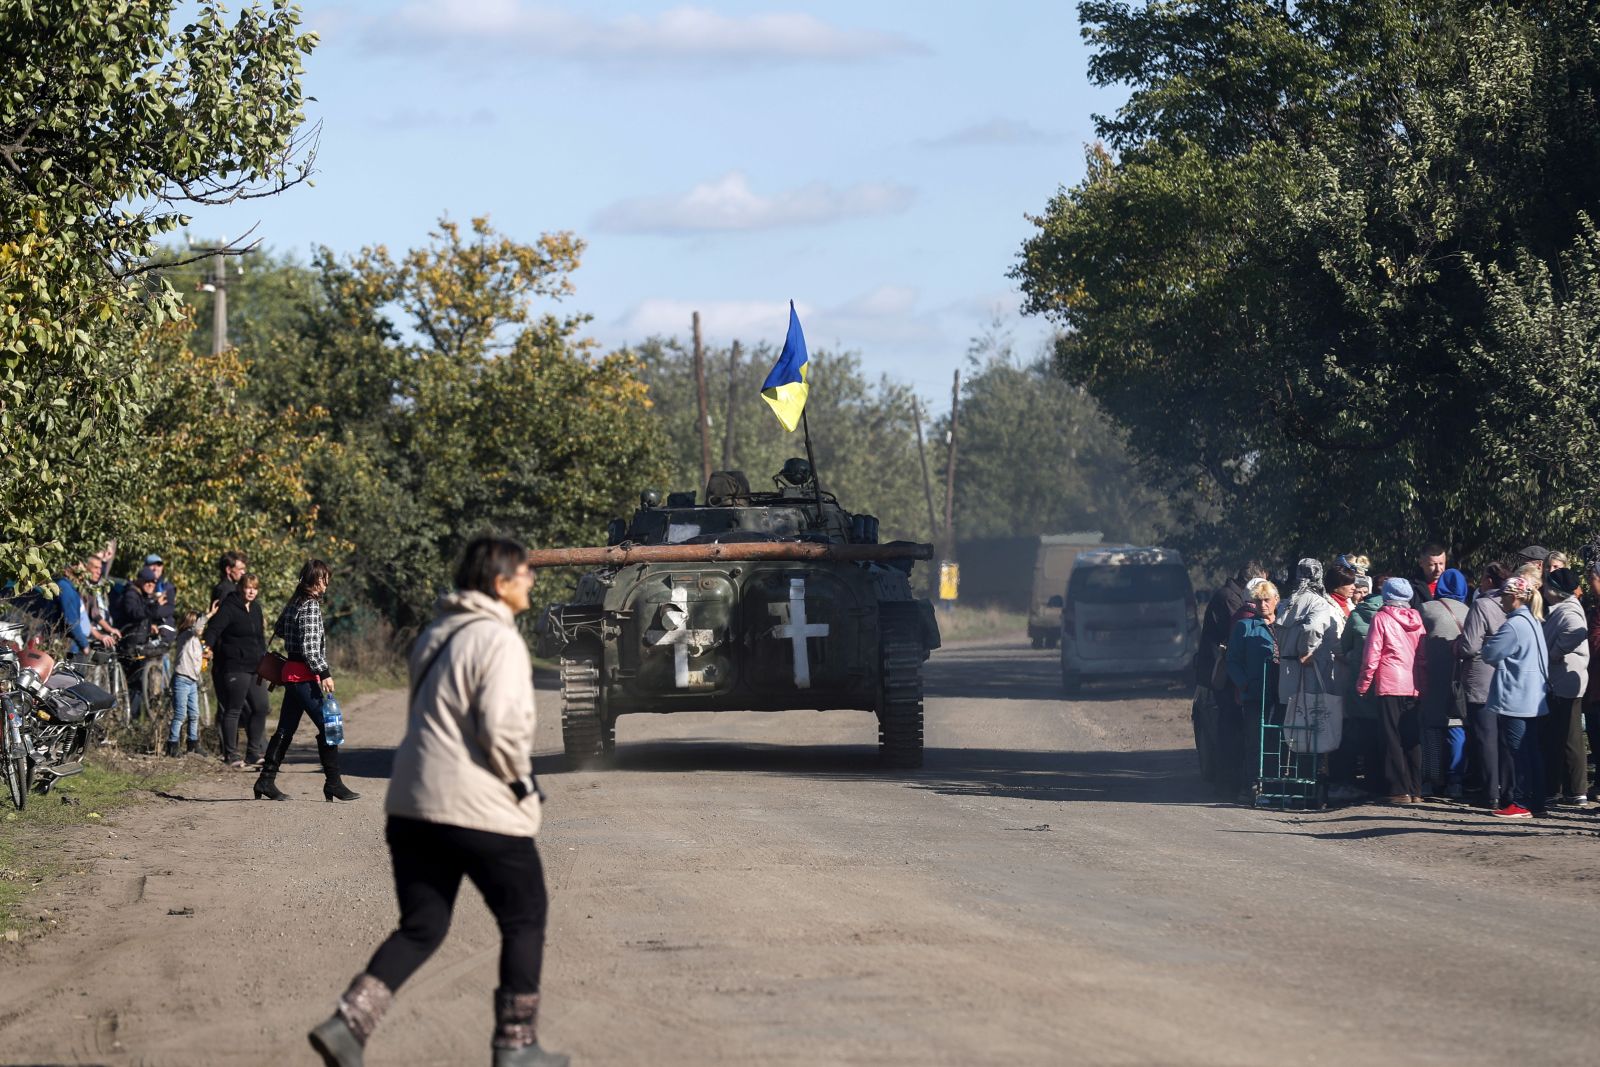 epa10227261 A Ukrainian APC drives by as resident wait for a truck carrying humanitarian aid in the village of Kapytolyvka, east of Izyum, Kharkiv Oblast, Ukraine, 06 October 2022. 
Russian troops withdrew from the occupied territory in the northeast. On 24 February 2022, Russian troops entered Ukrainian territory starting an armed conflict that has provoked destruction and a humanitarian crisis.  EPA/ATEF SAFADI